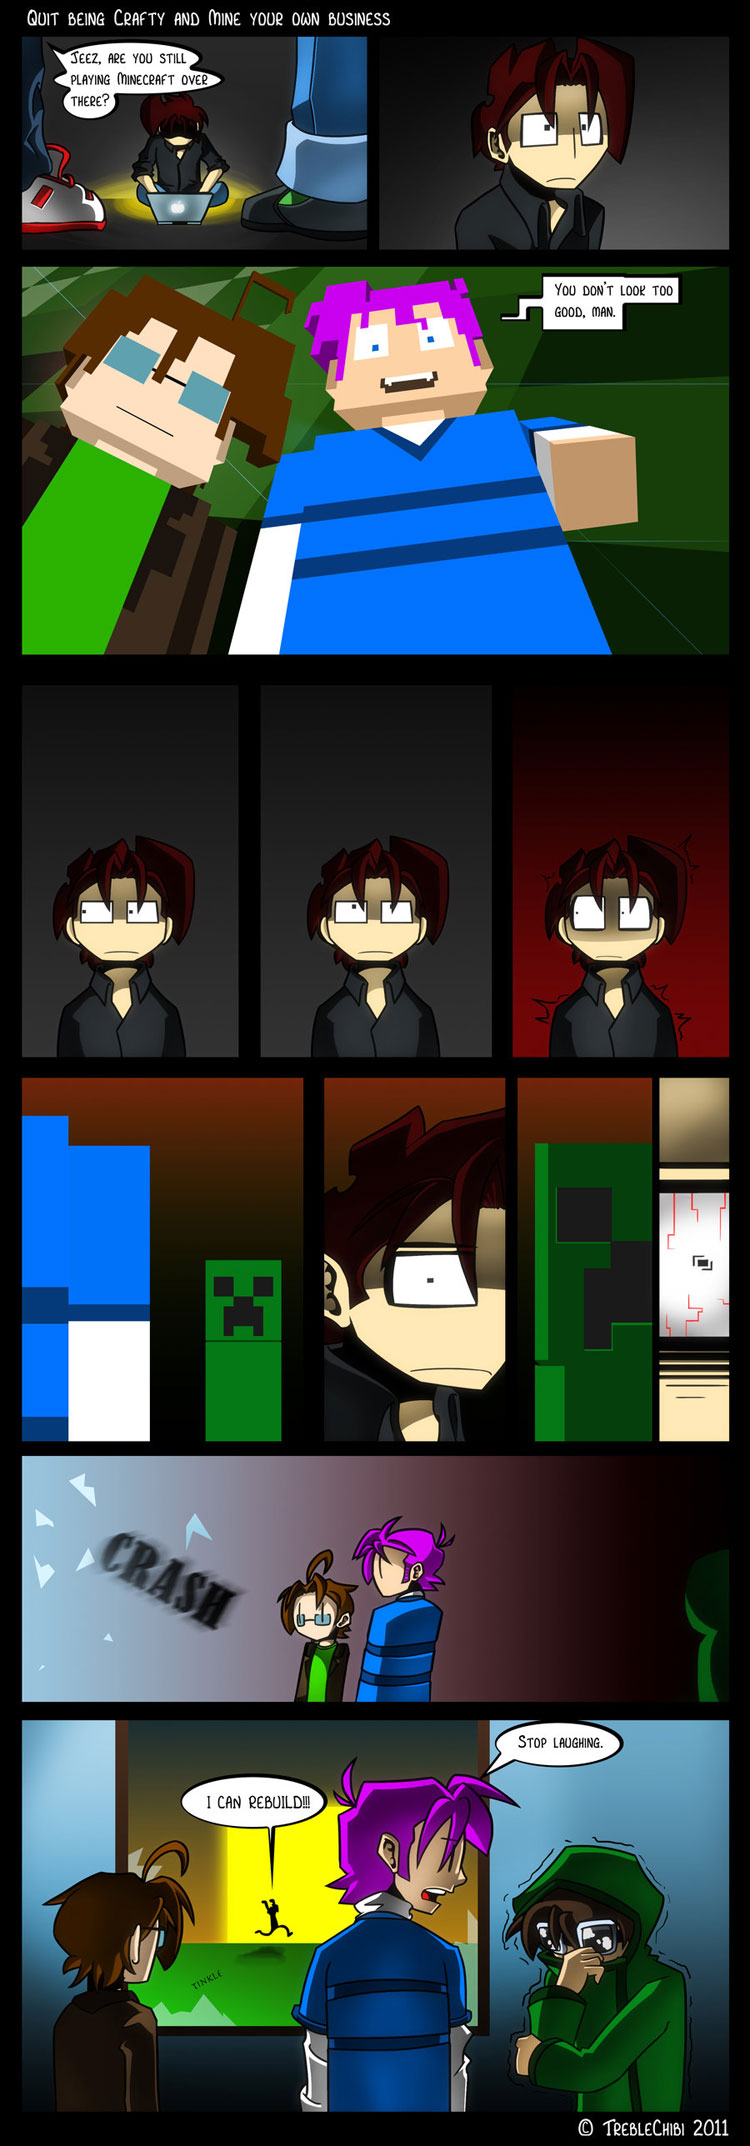 Minecraft Comic #3 - Quit Being Crafty and Mine Your Own 